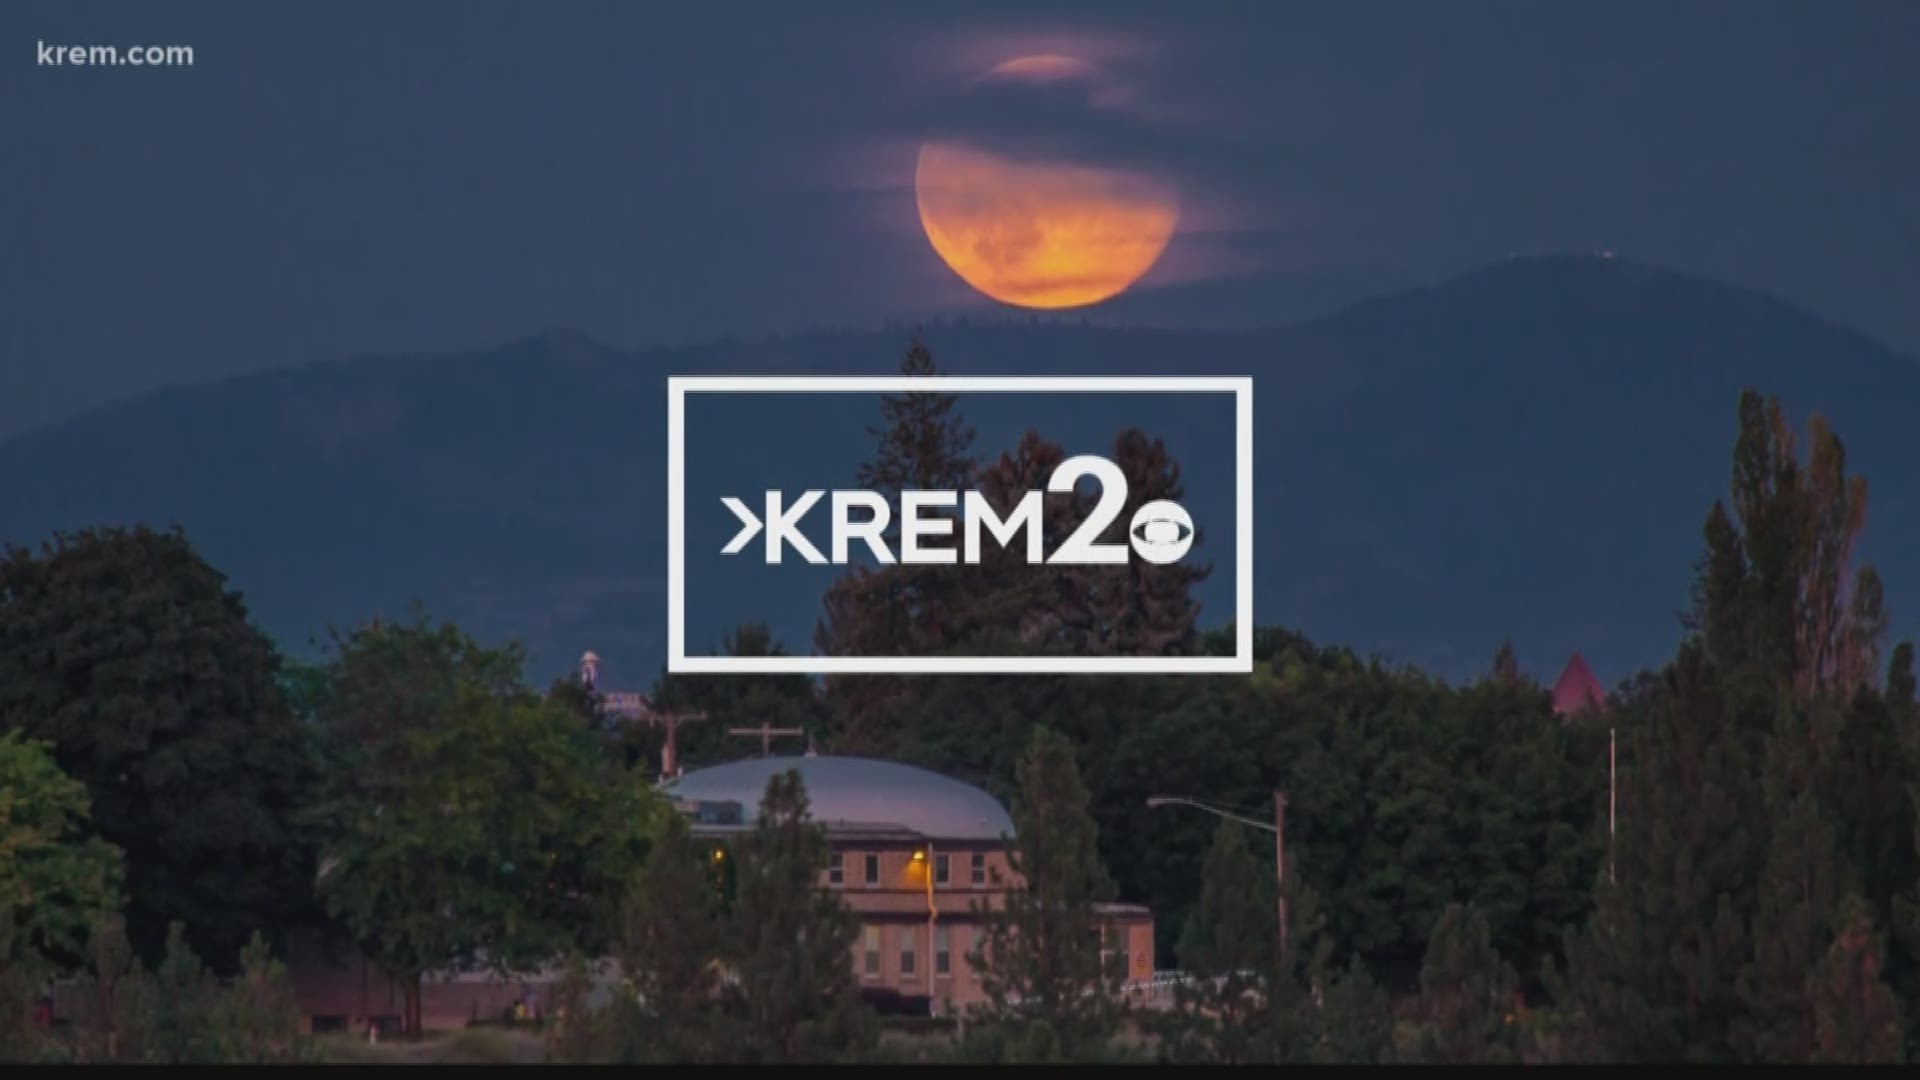 These are the top stories from KREM 2 News at 11 p.m.